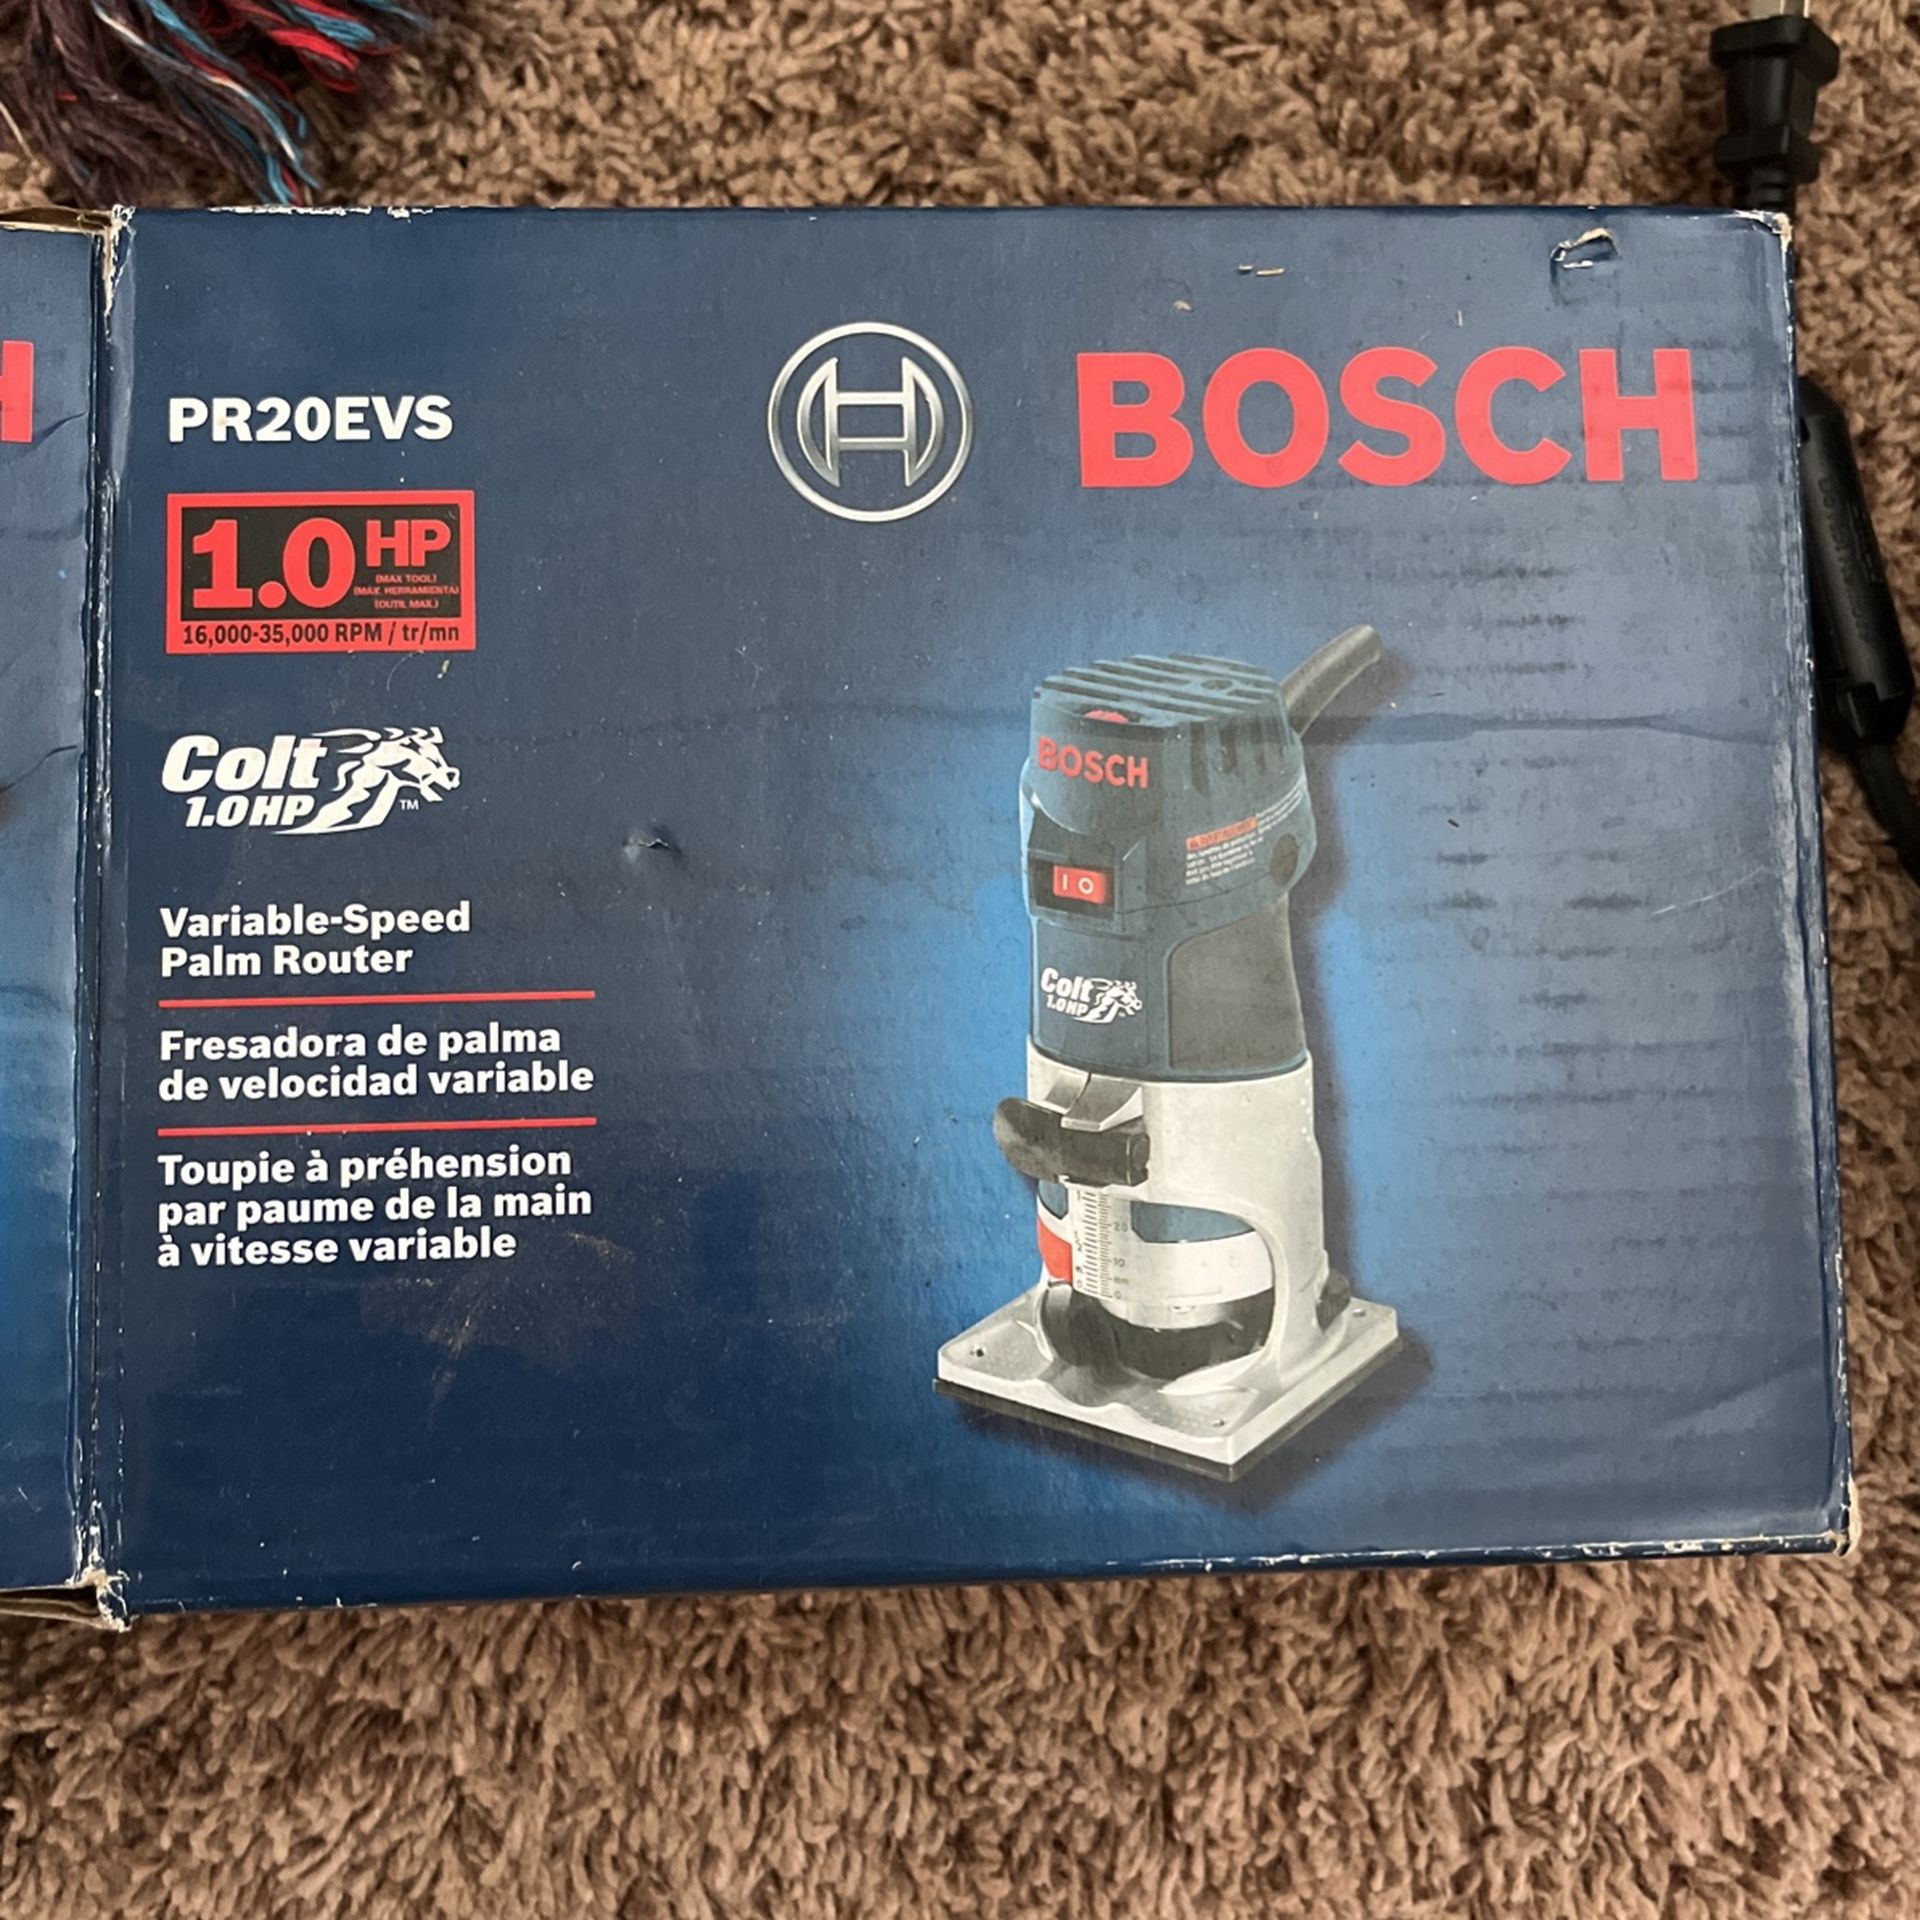 Bosch Colt PR20EVS Electronic Variable-Speed Palm Router